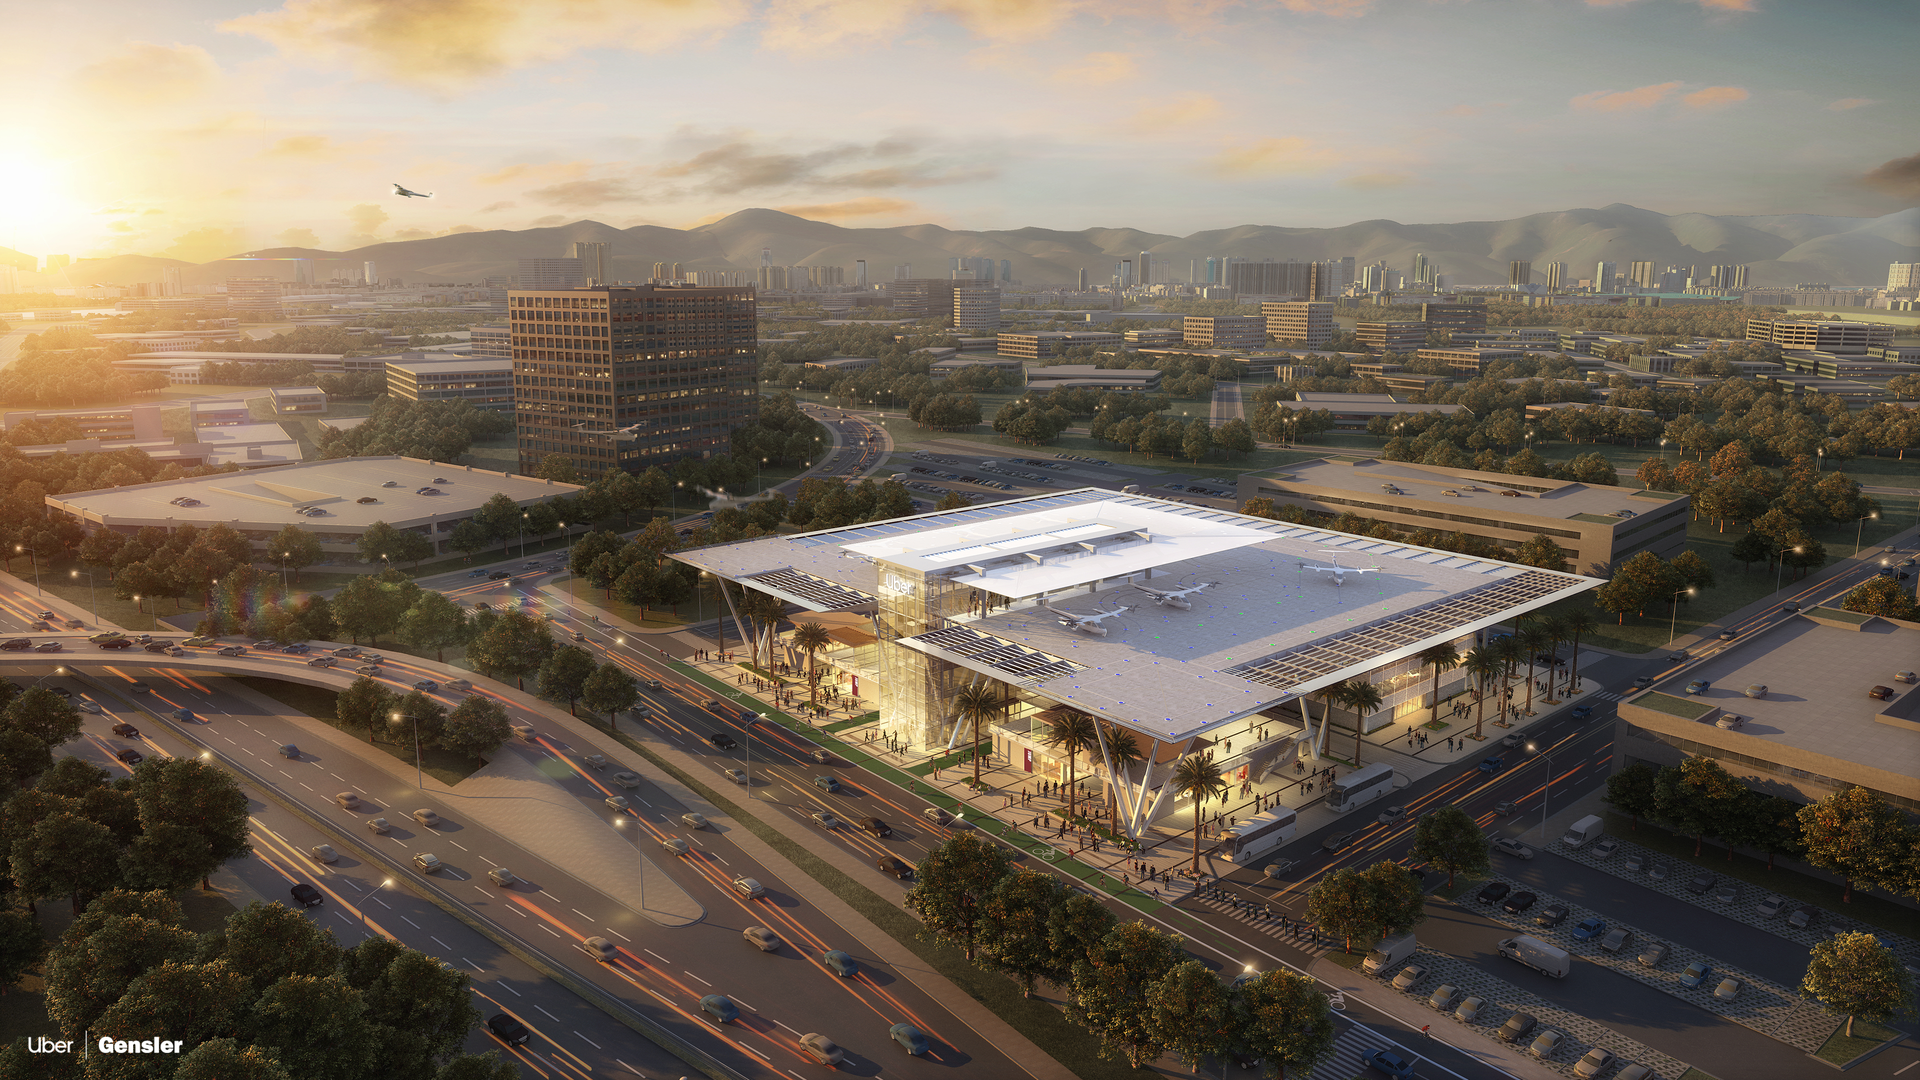 Rendering of an urban skyport for aerial taxis in Los Angeles